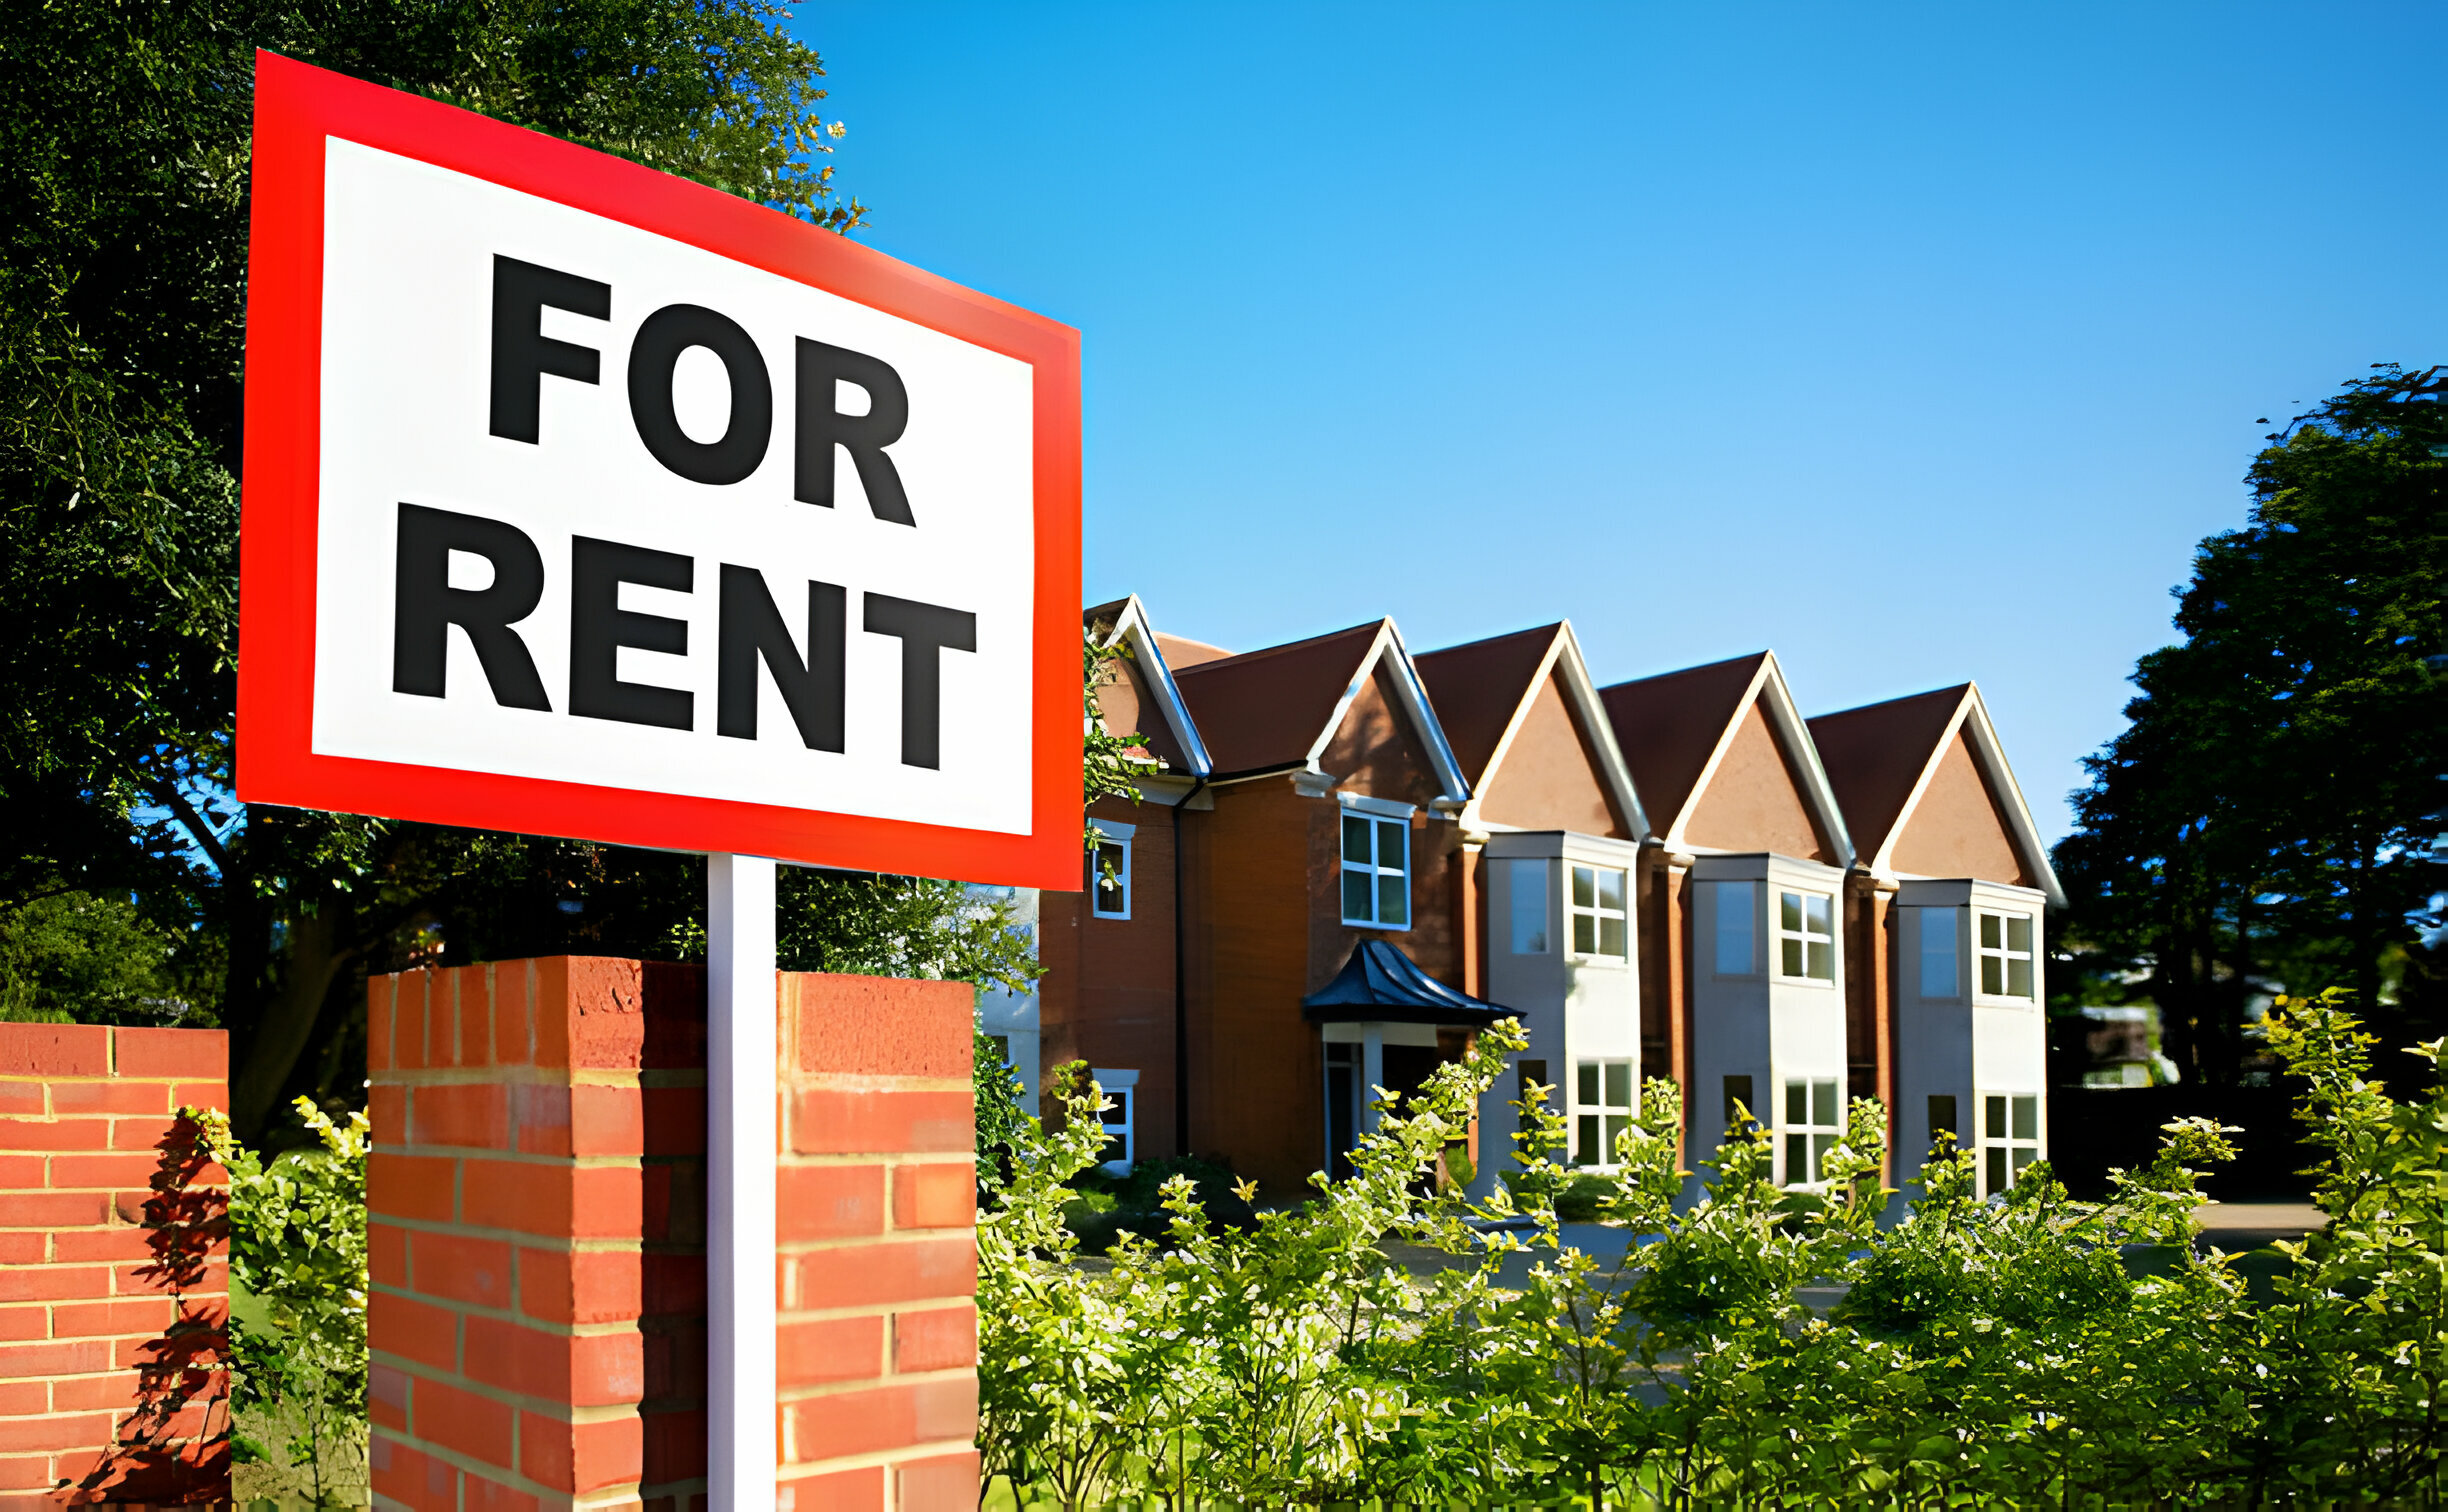 Find Your Next Home: Houses for Rent That Accept Section 8 Vouchers